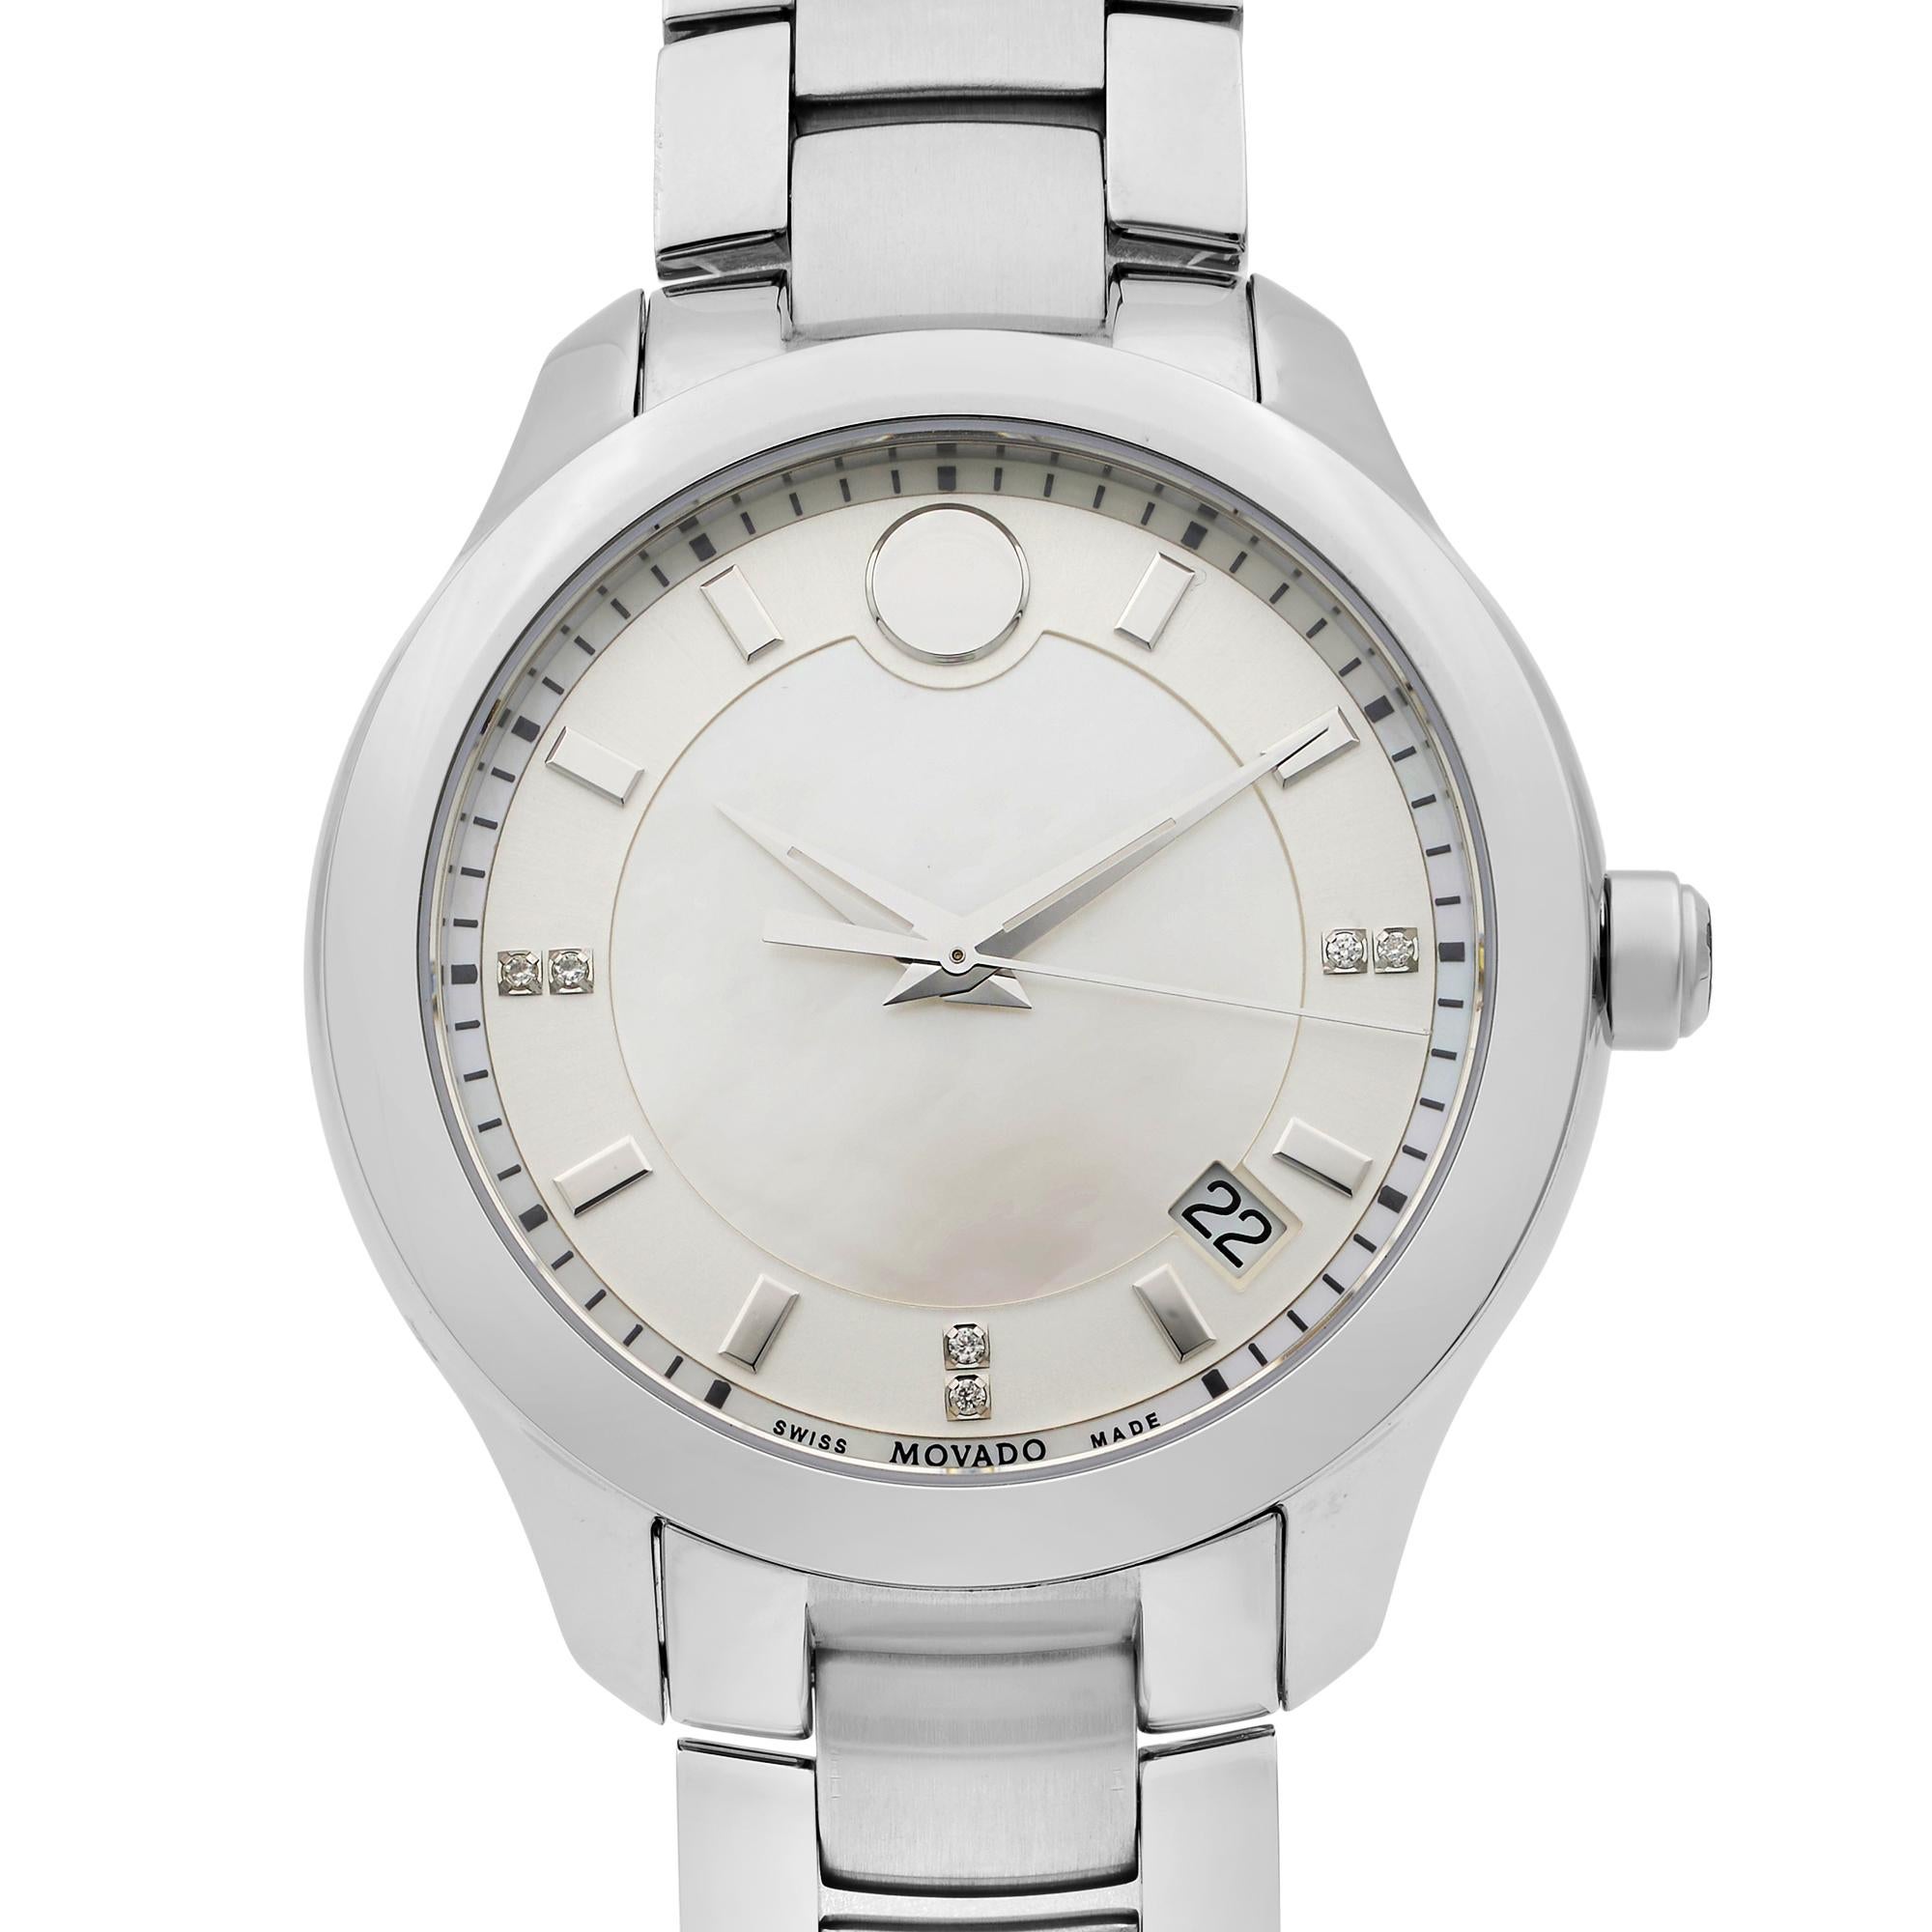 This display model Movado Bellina  0606978 is a beautiful Ladie's timepiece that is powered by quartz (battery) movement which is cased in a stainless steel case. It has a round shape face, date indicator dial and has hand diamonds, sticks style